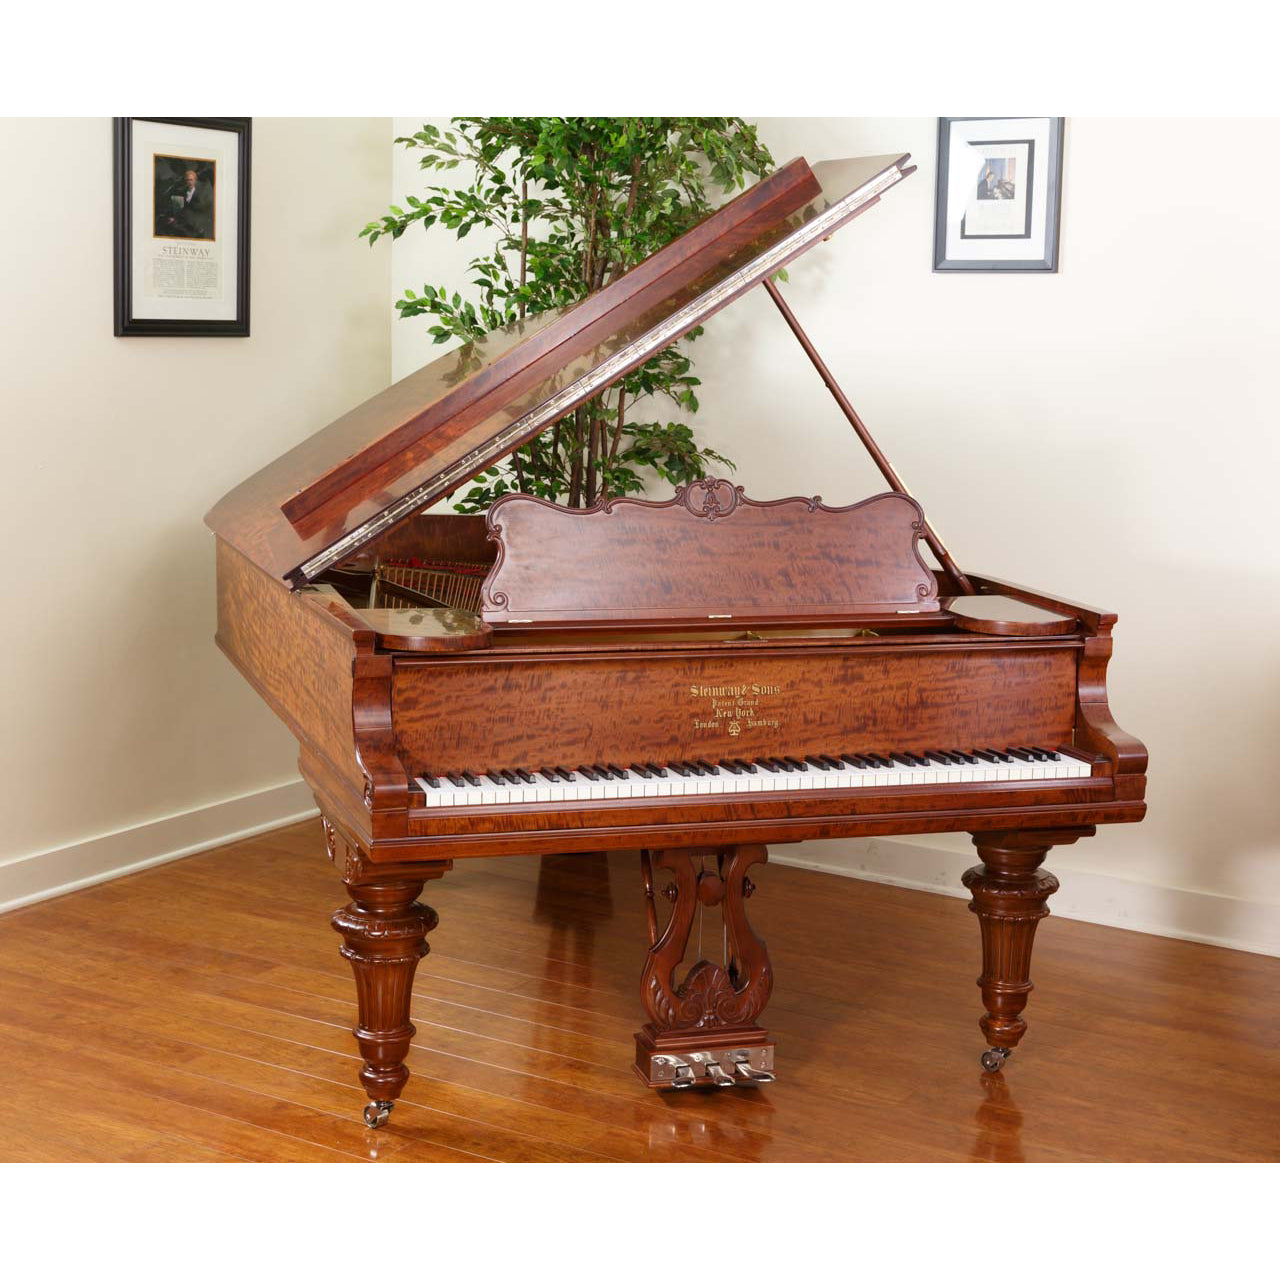 Piano Cơ Steinway & Sons (Used)